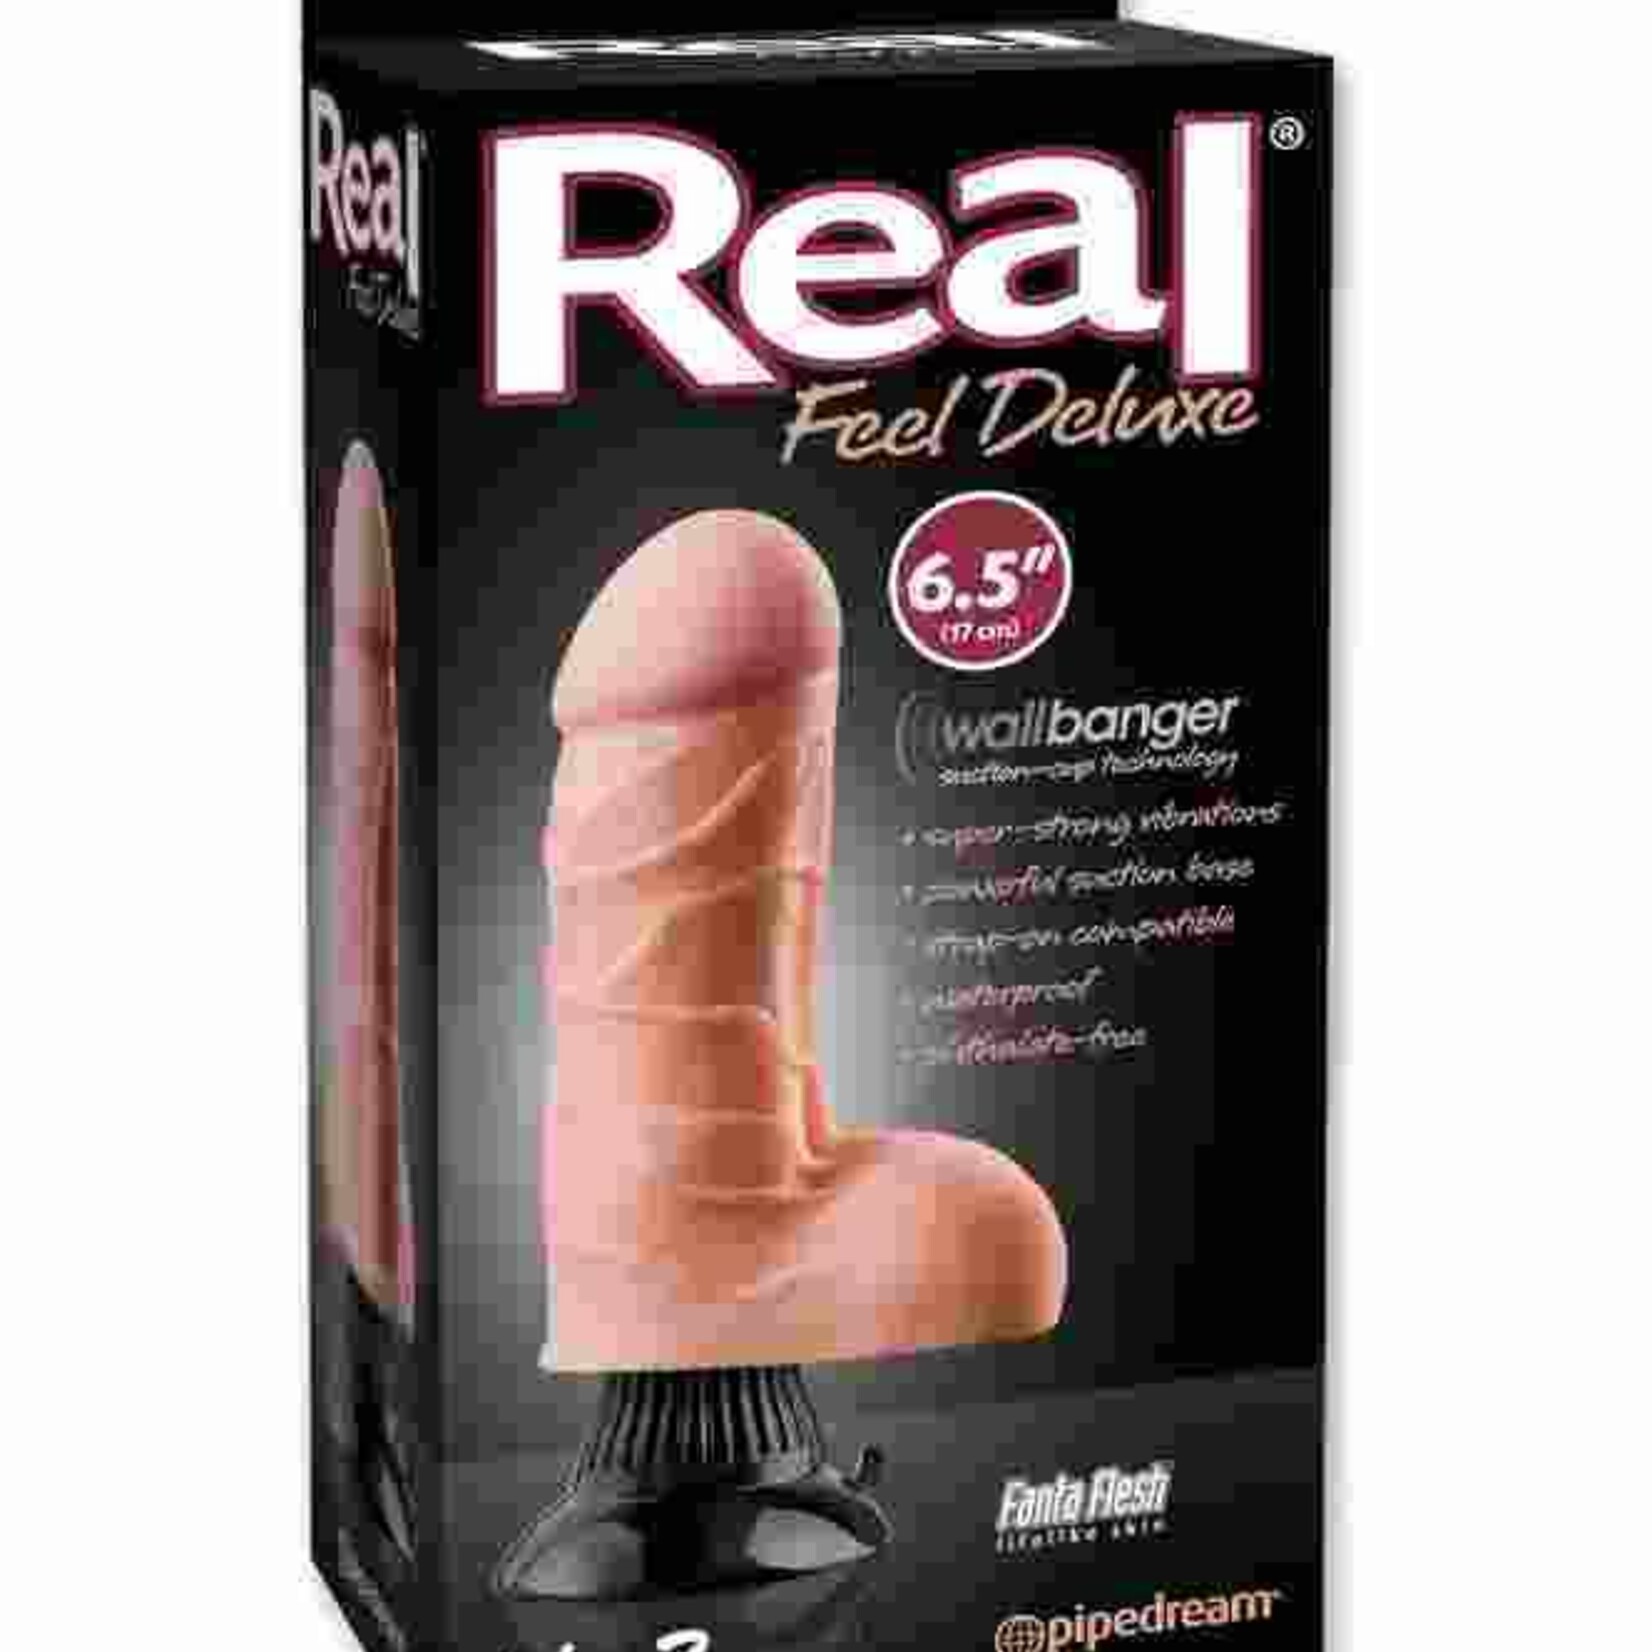 Real Feel Deluxe No. 2 - 6.5" Vibrator